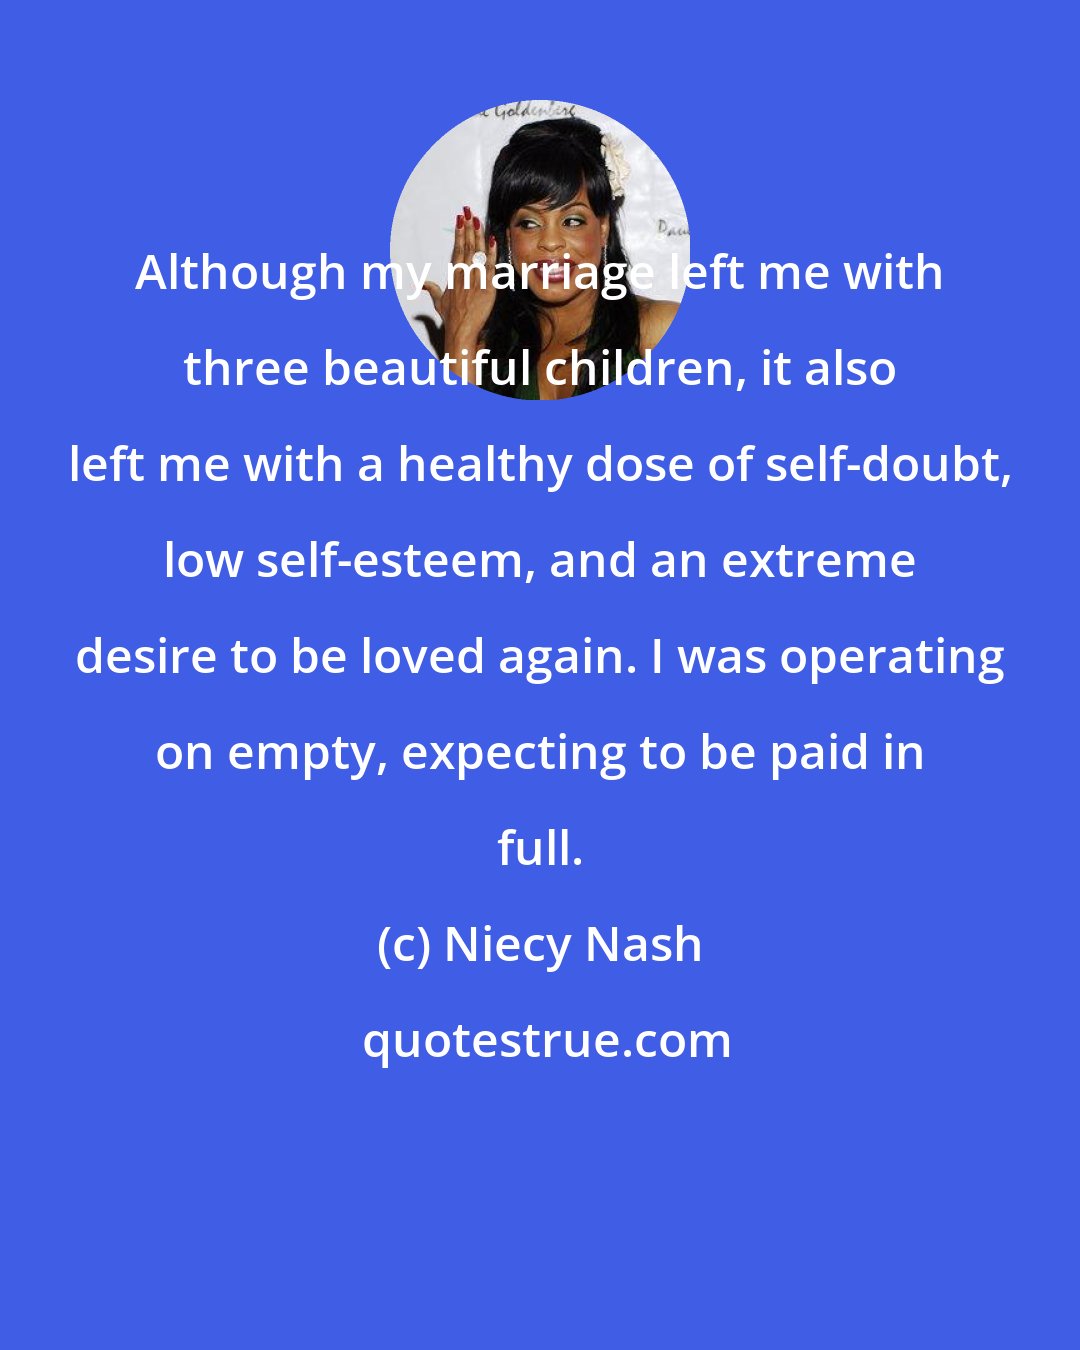 Niecy Nash: Although my marriage left me with three beautiful children, it also left me with a healthy dose of self-doubt, low self-esteem, and an extreme desire to be loved again. I was operating on empty, expecting to be paid in full.